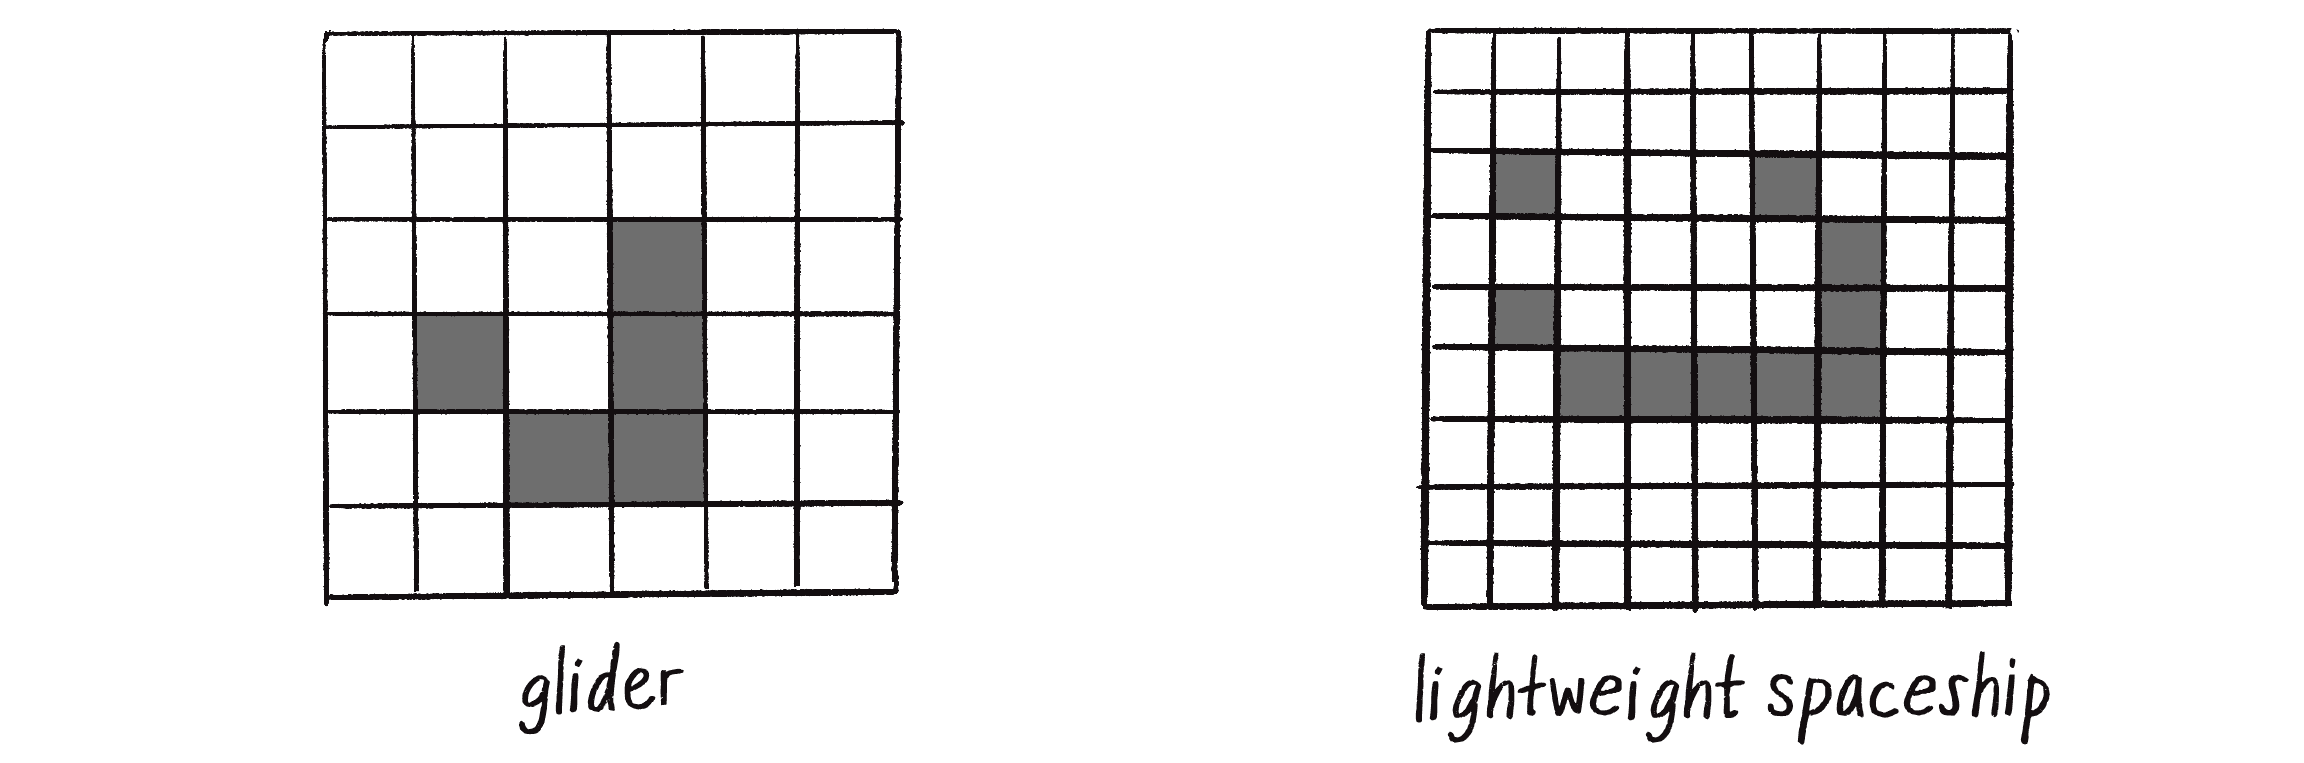 Figure 7.30: Initial configurations of cells that appear to move